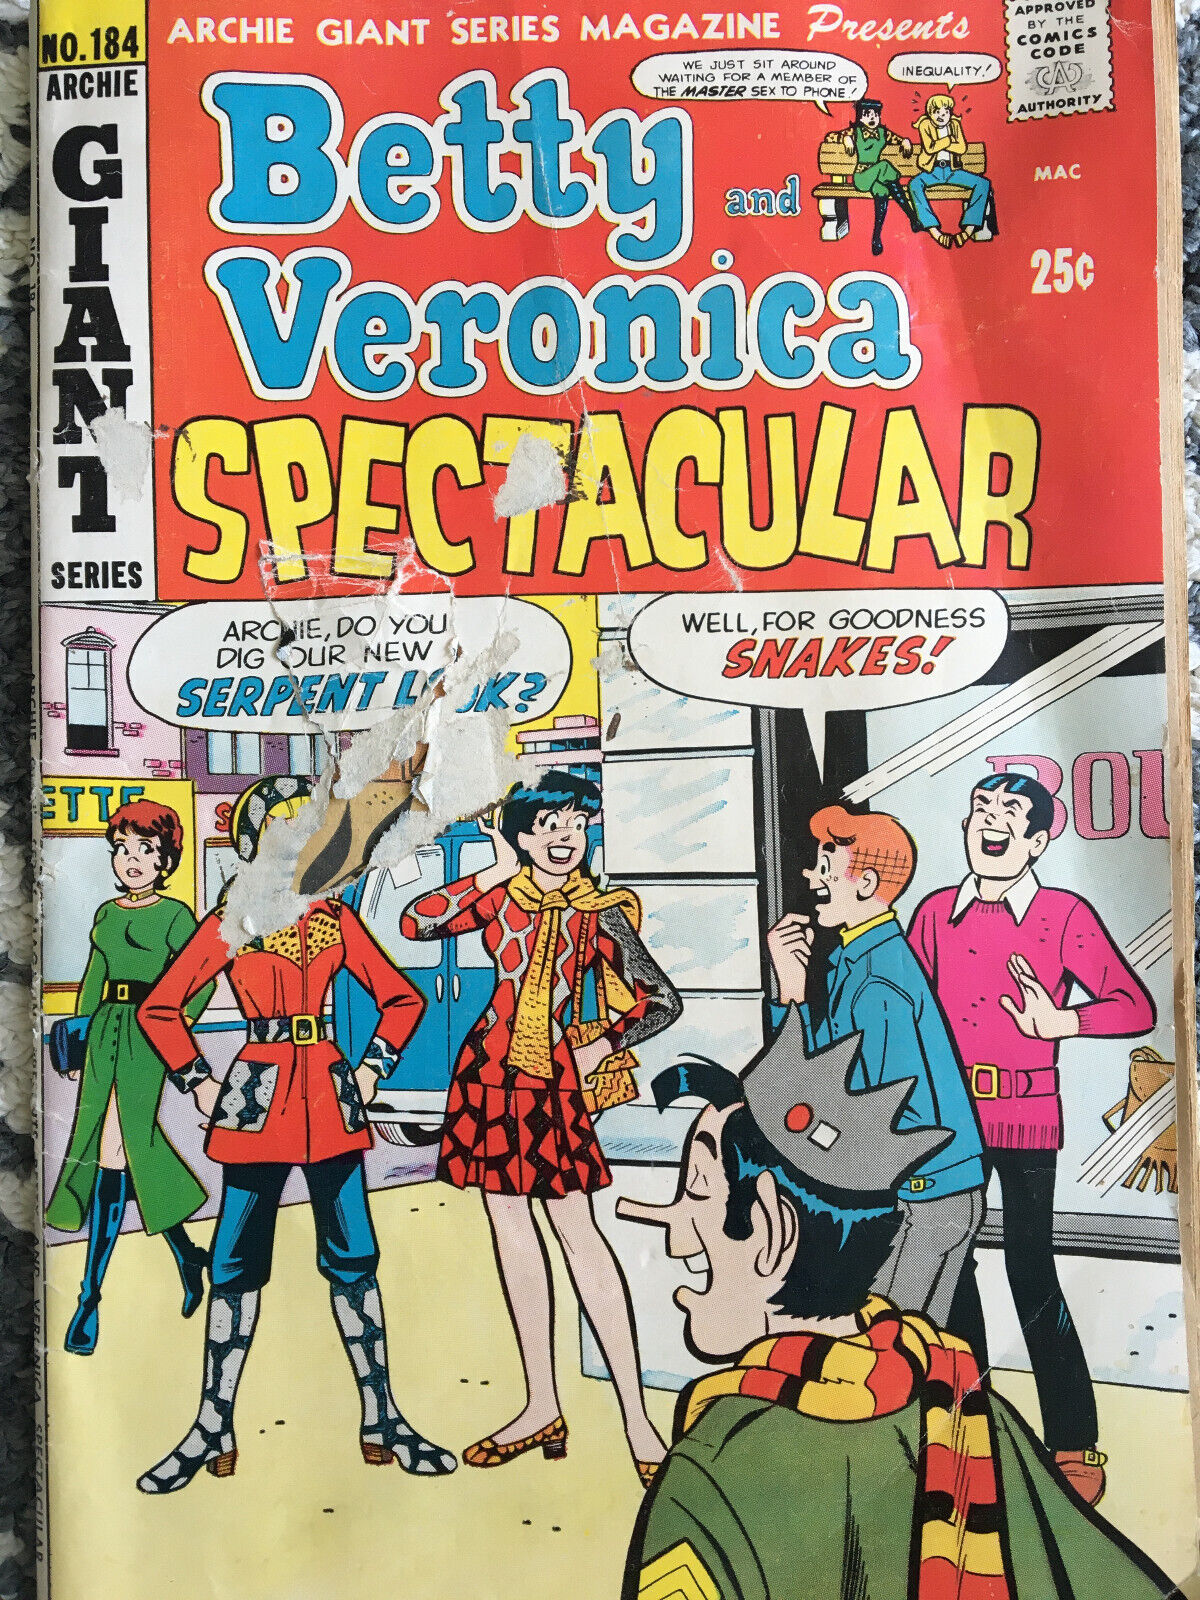 Vintage 1971  BETTY AND VERONICA SPECTACULAR Comic #184 ARCHIE GIANT SERIES